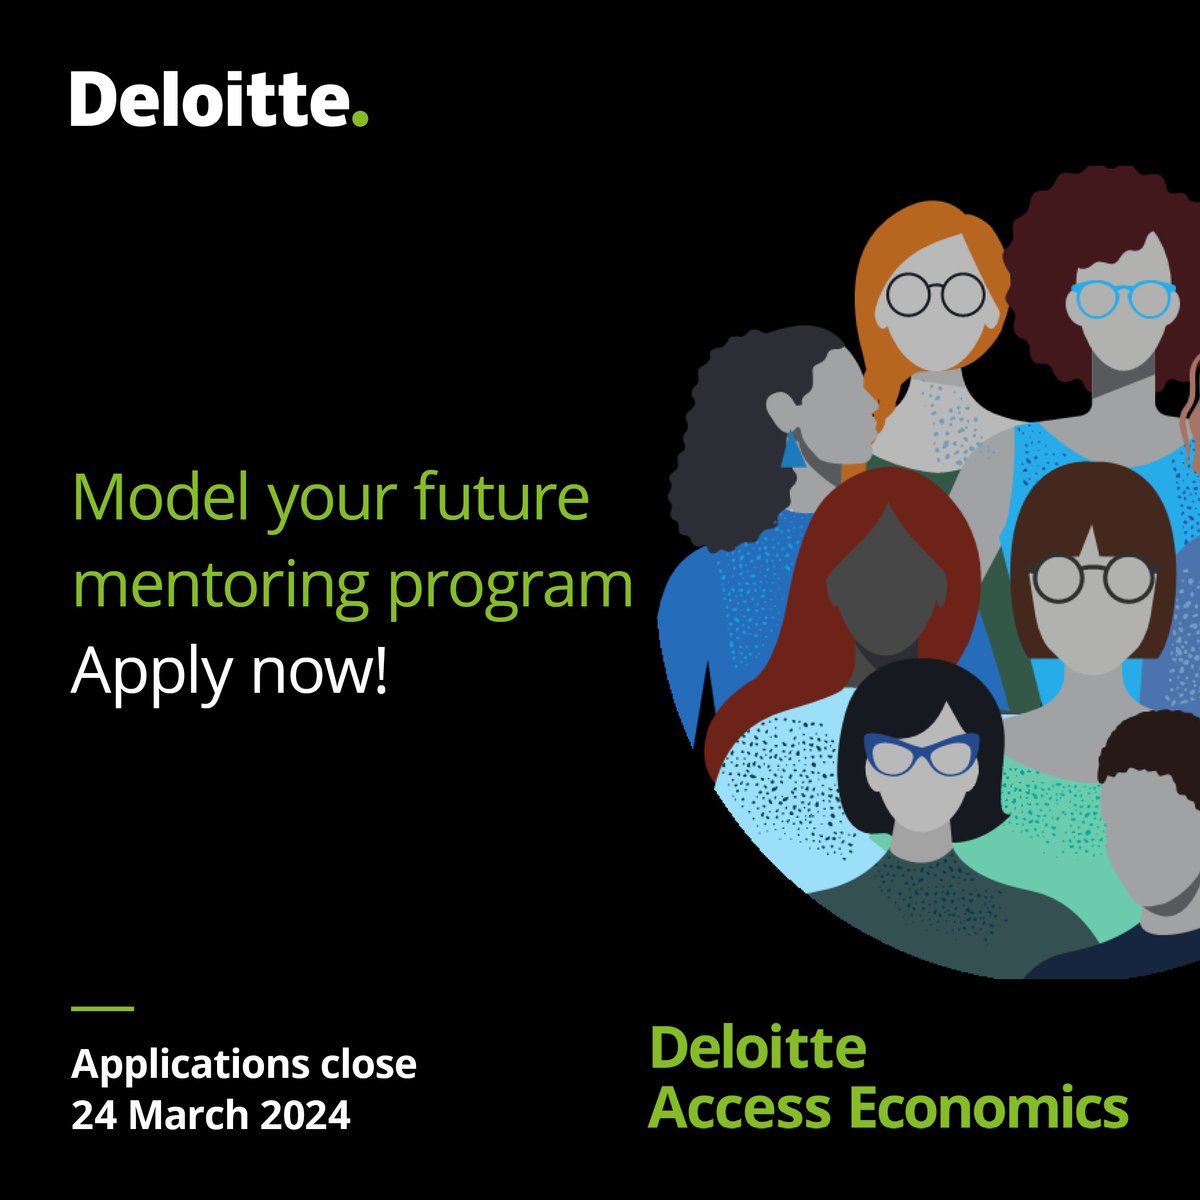 Last chance to apply for the Deloitte Access Economics Model your future mentoring program! Applications close on Sunday March 24, 2024. Apply today: deloi.tt/4a3akPI